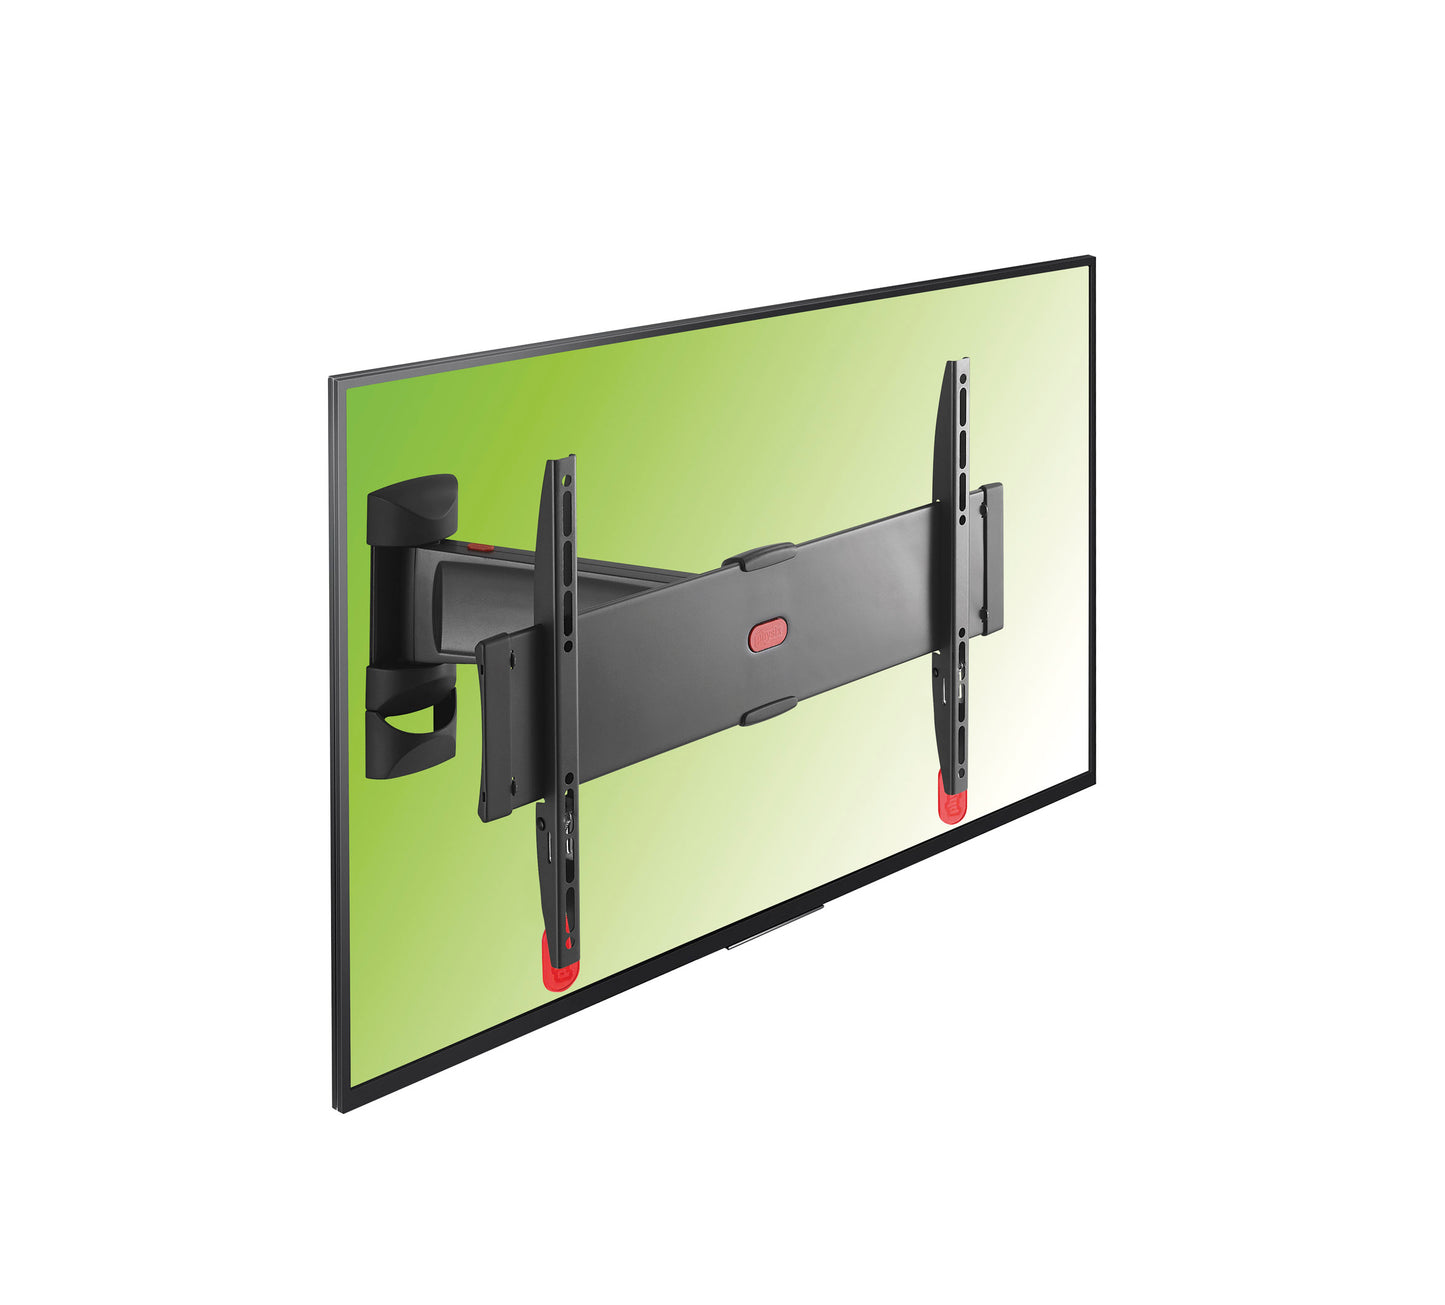 Physix PHW 300 M Full-Motion TV Wall Mount